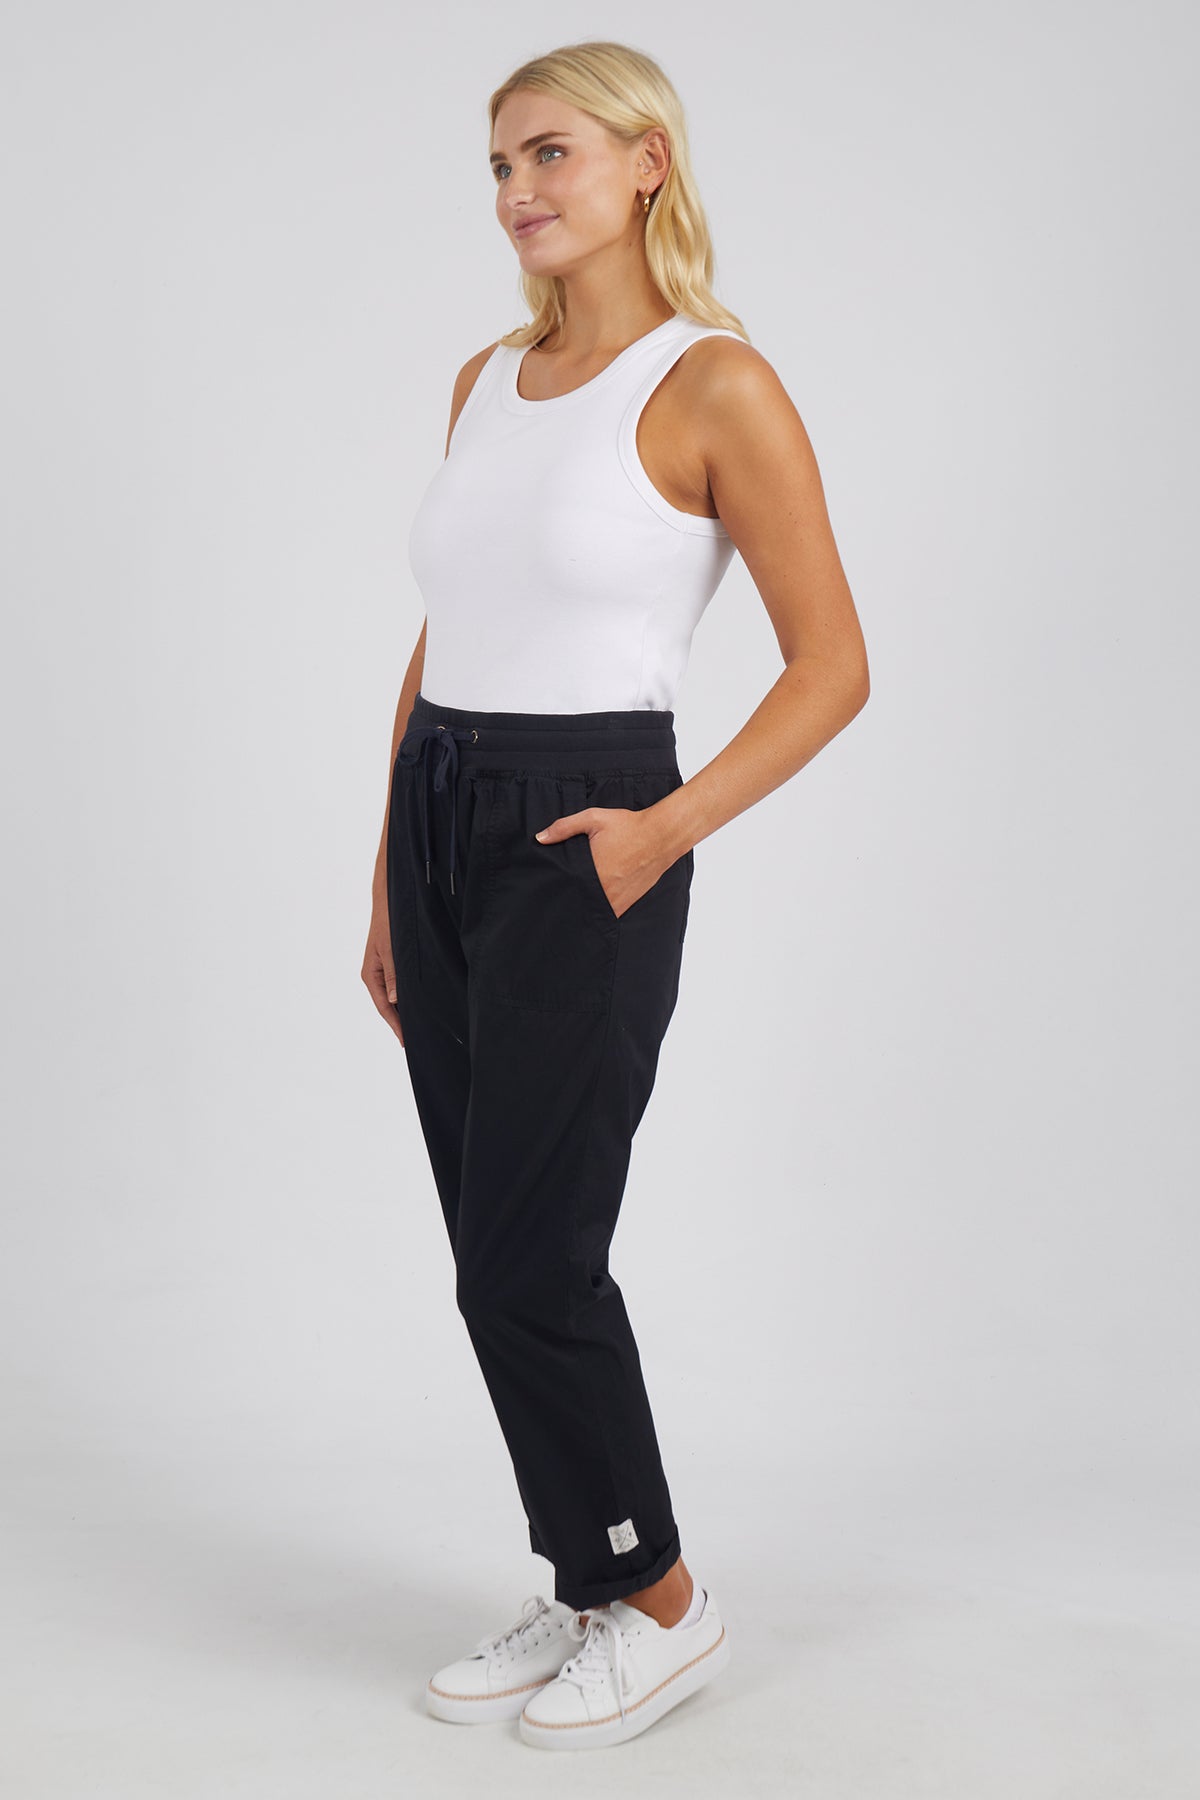 Carrie Jogger Pant Black